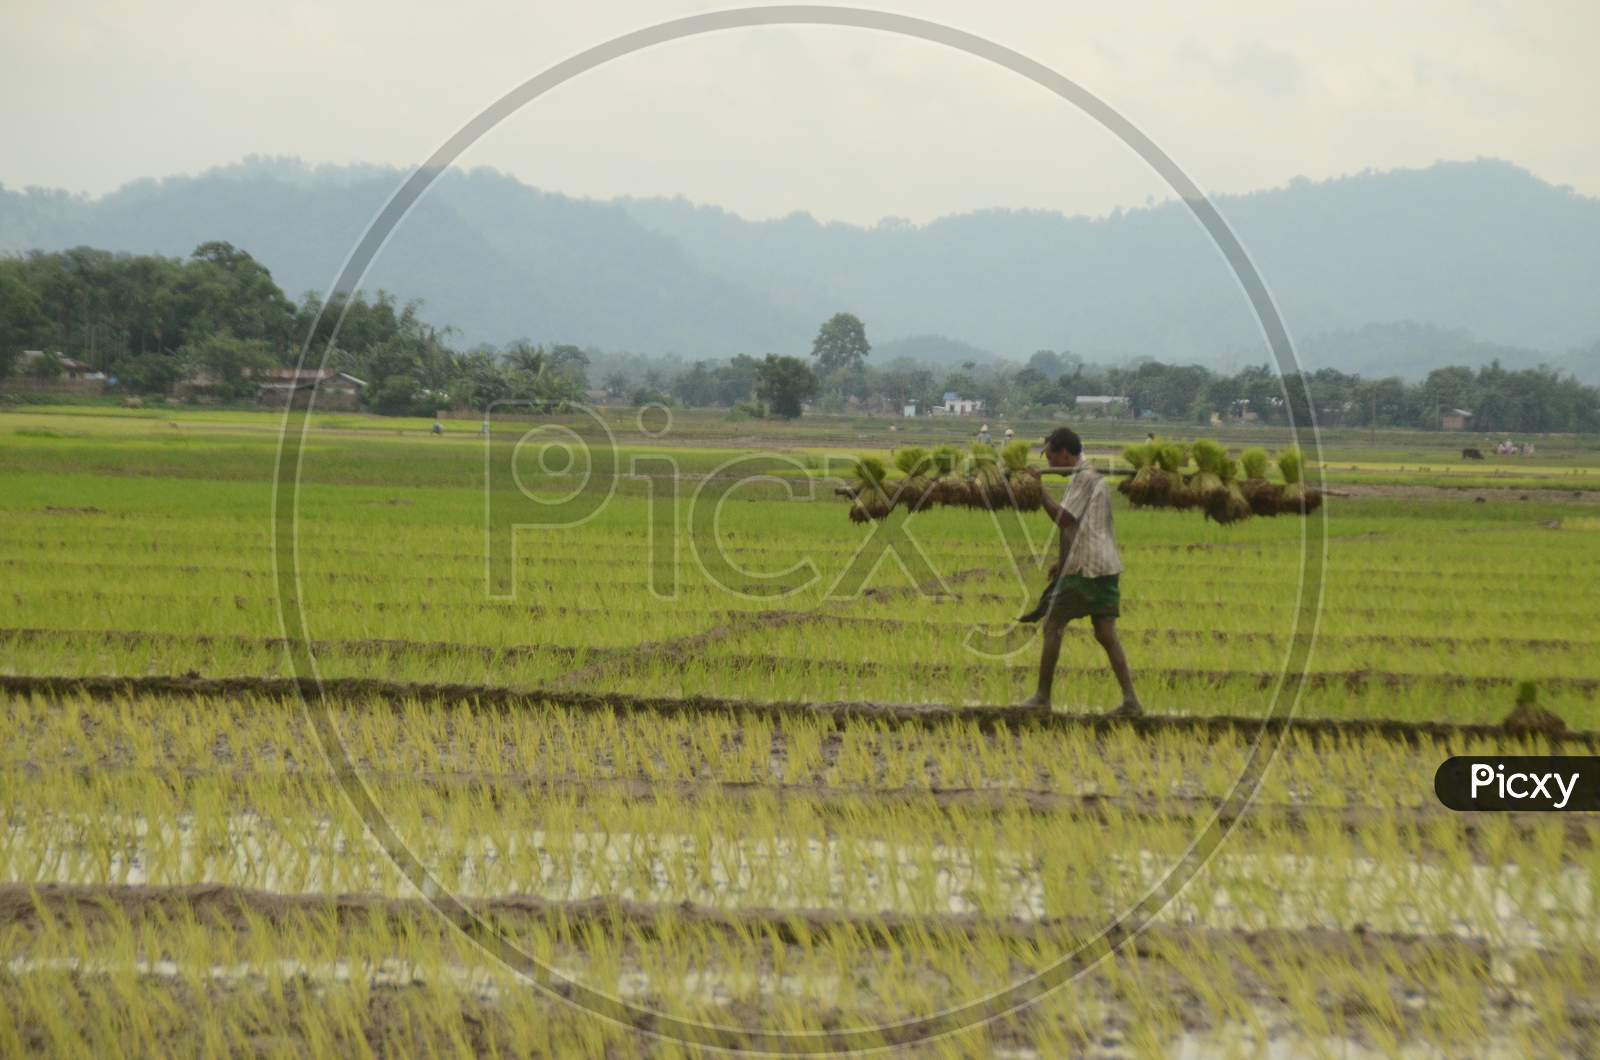 A Farmer Carrying Paddy Sapling Bundles Over His Shoulder In Paddy Harvesting Fields